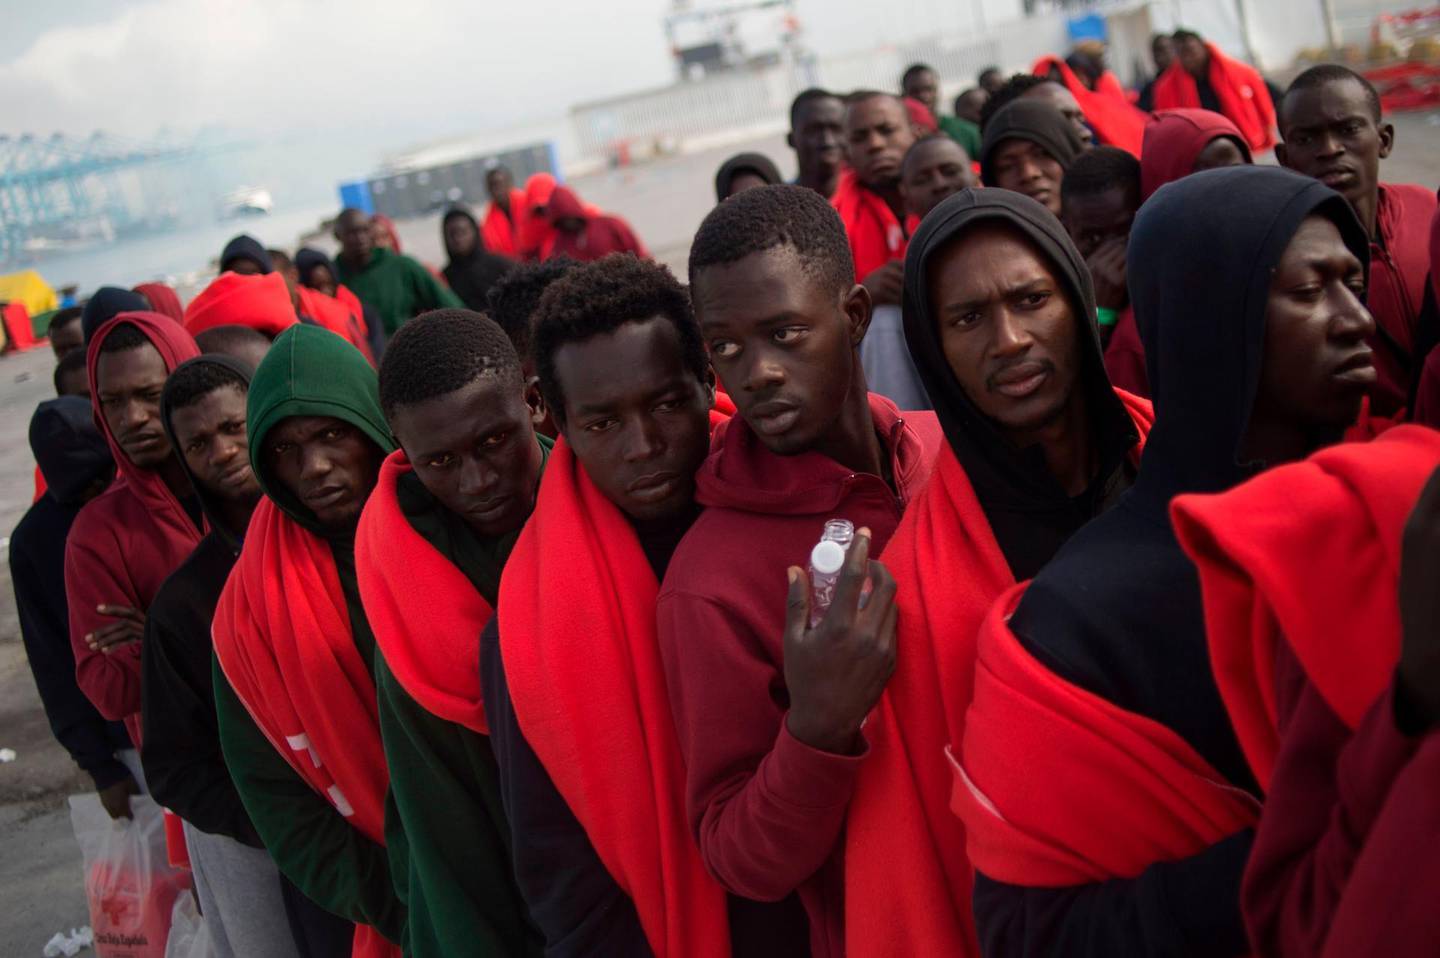 TOPSHOT - Migrants rescued at sea wait to be transferred at the harbour of Algeciras on August 1, 2018. 
Spain has overtaken Italy as the preferred destination for migrant arrivals in Europe this year as a crackdown by Libyan authorities has made it more difficult for them to reach Italian shores.  / AFP PHOTO / JORGE GUERRERO